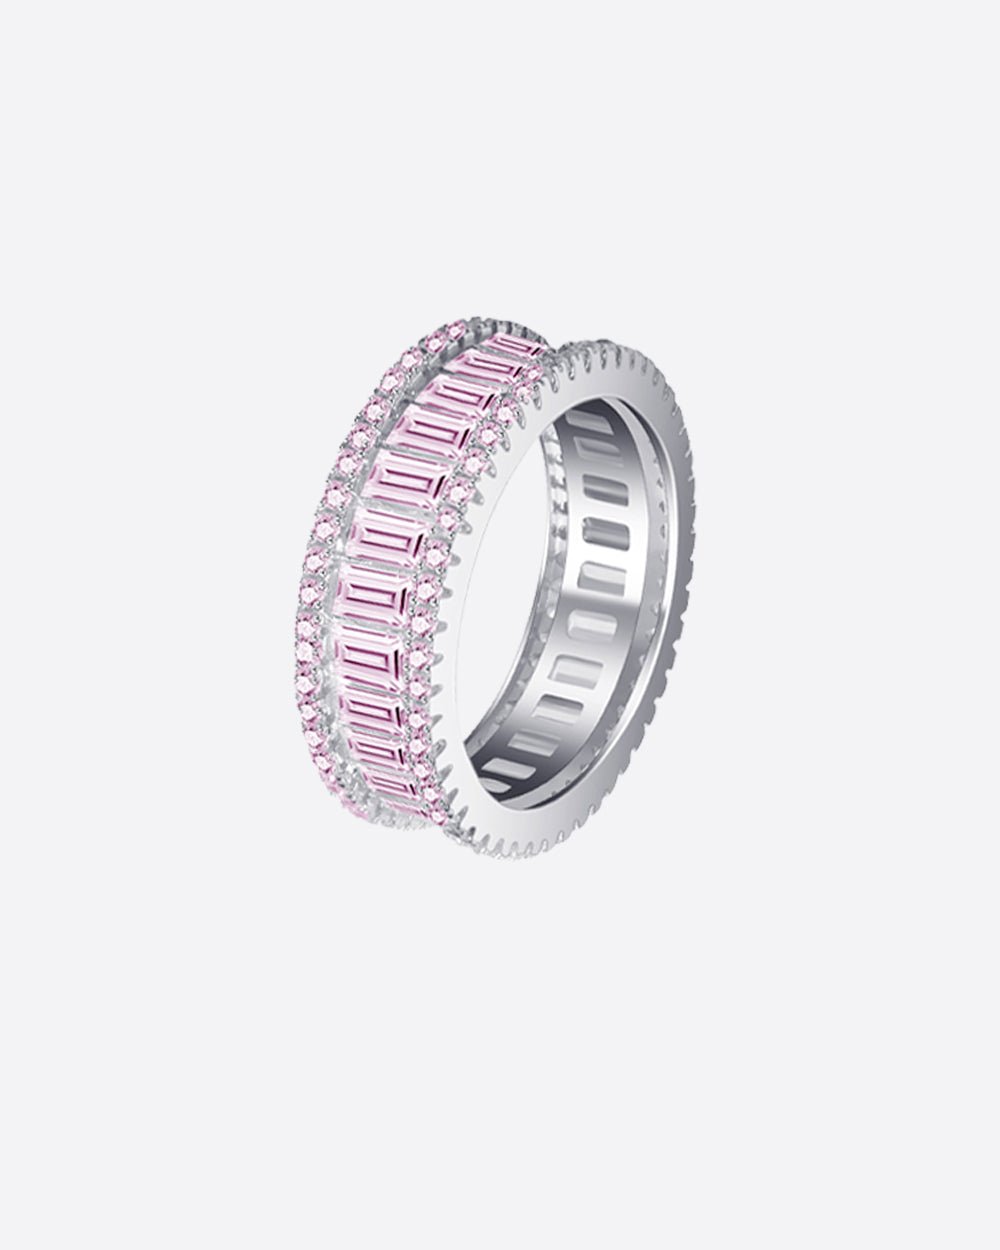 PINK BAGUETTE BAND RING 925. - WHITE GOLD